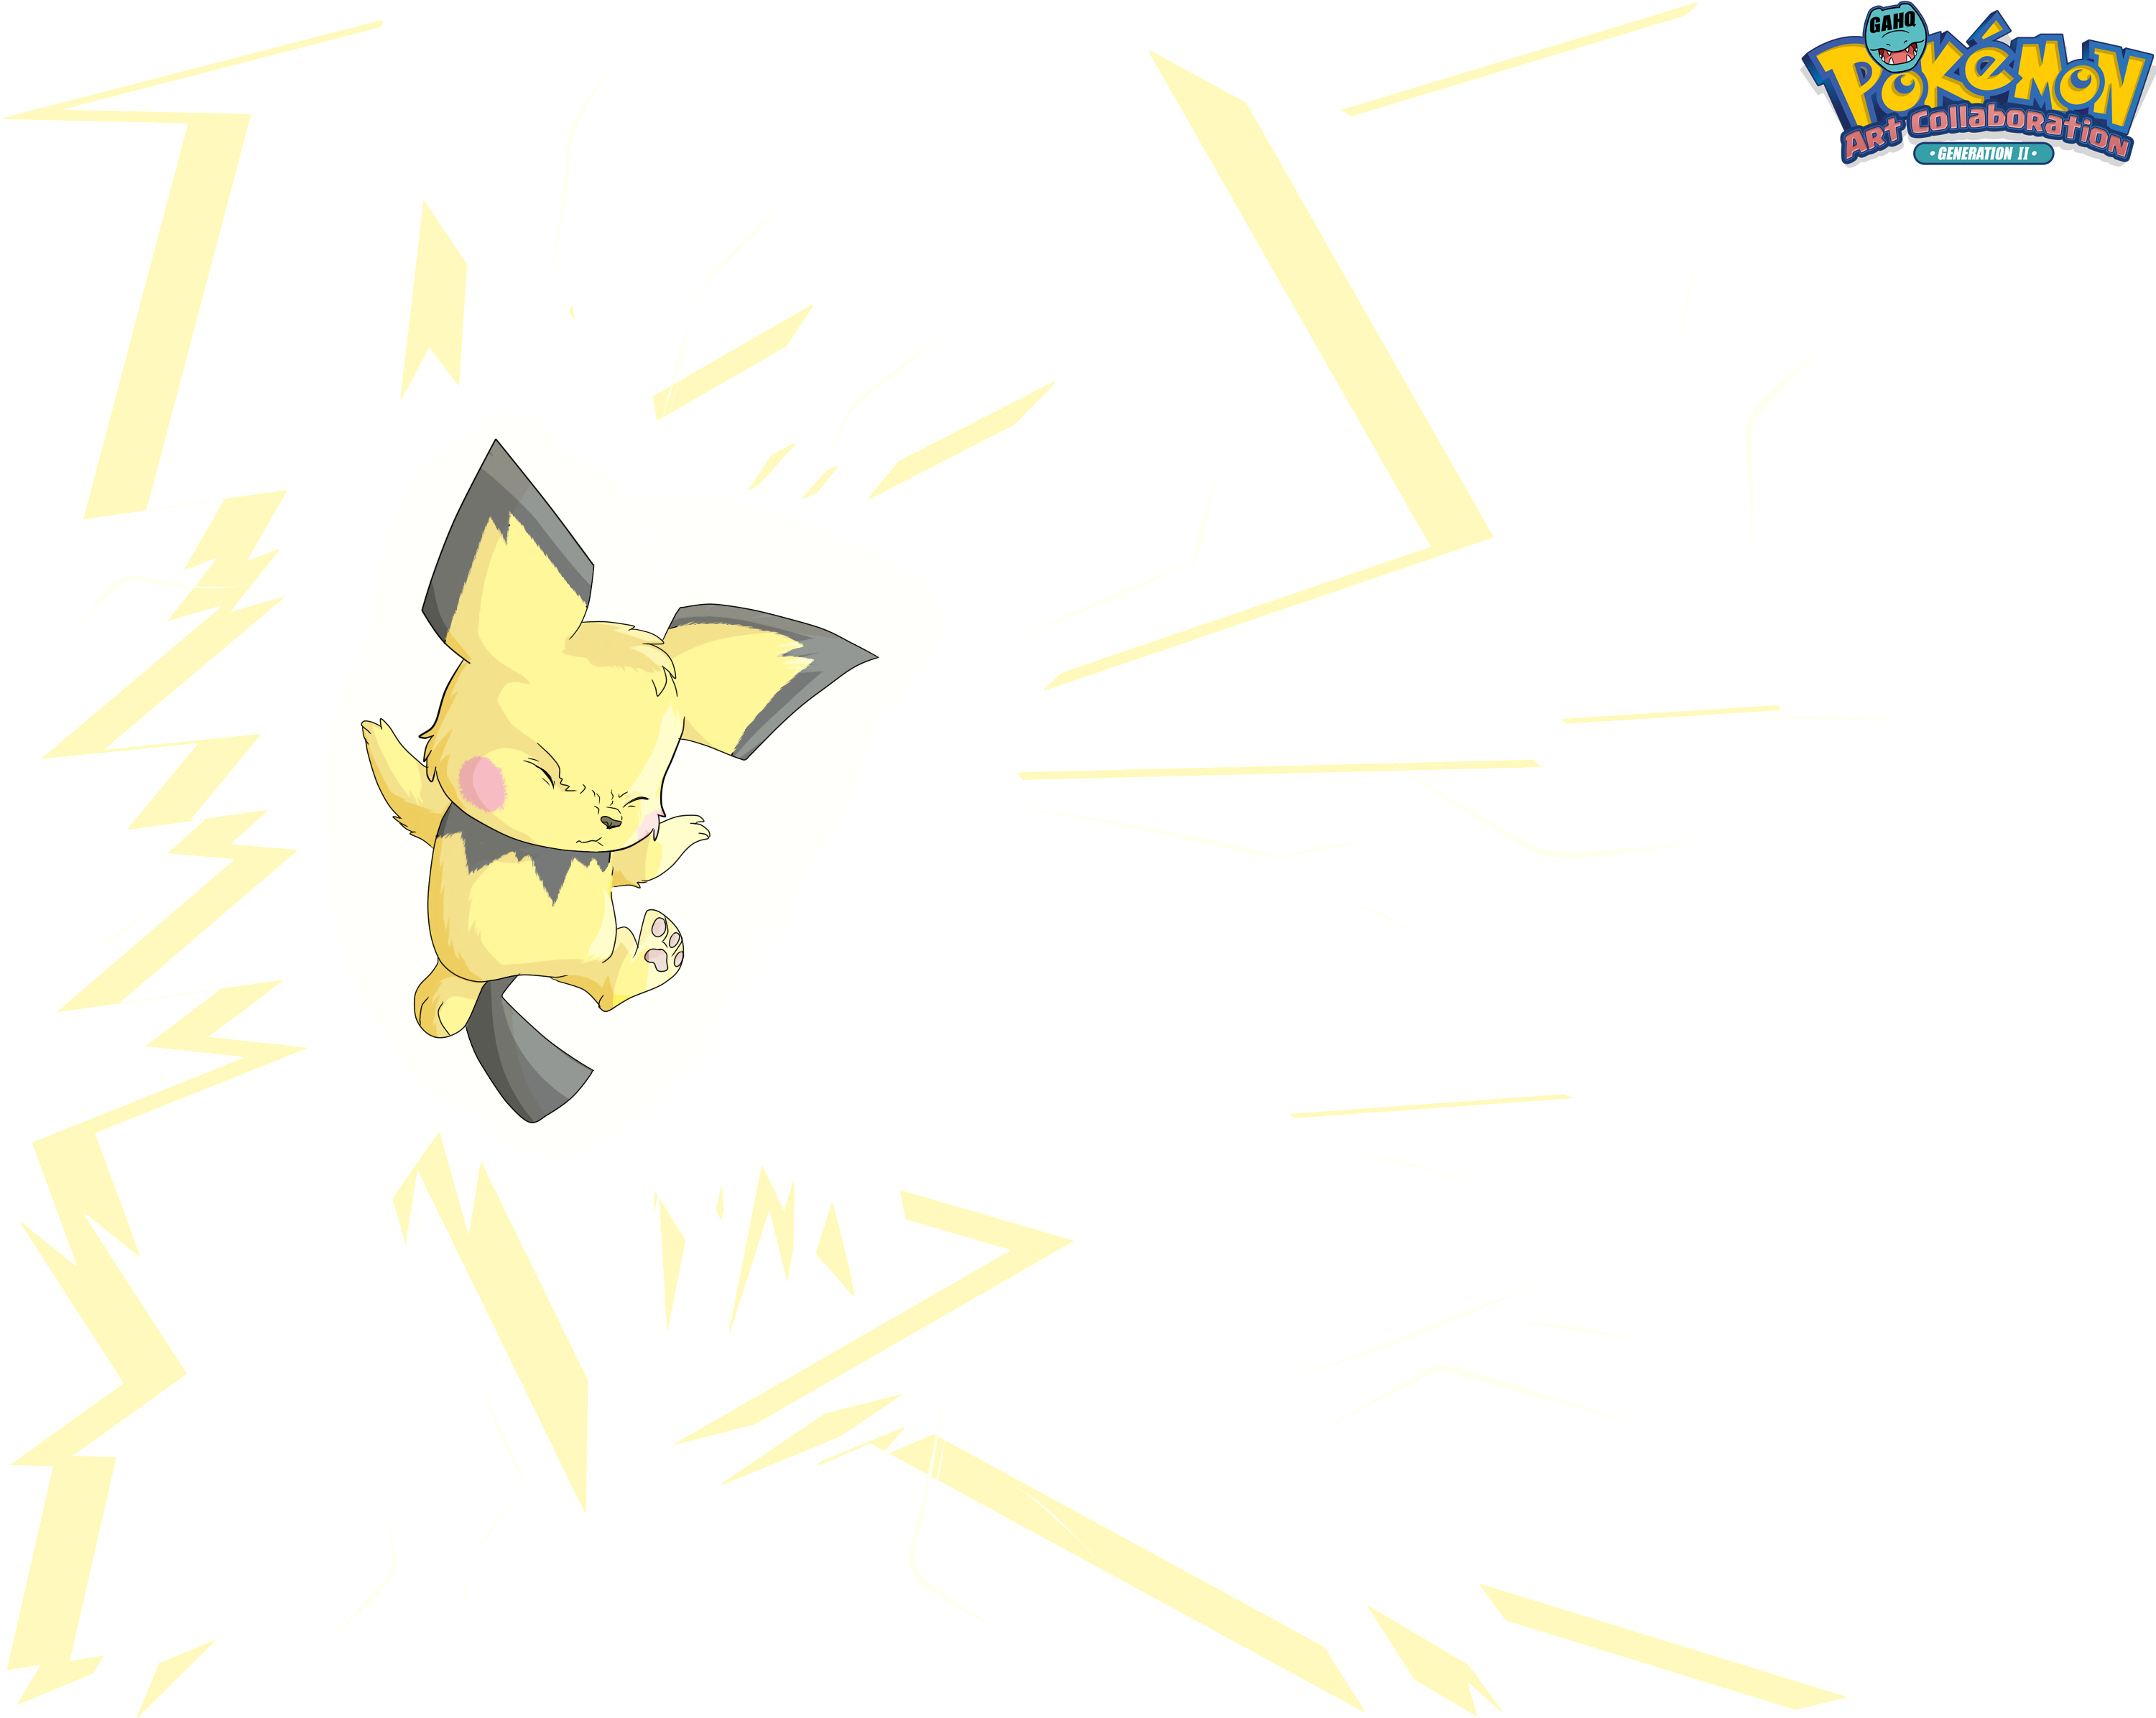 #172 Pichu Used Thunder Shock And Charm In The Game - Illustration (3000x2400)